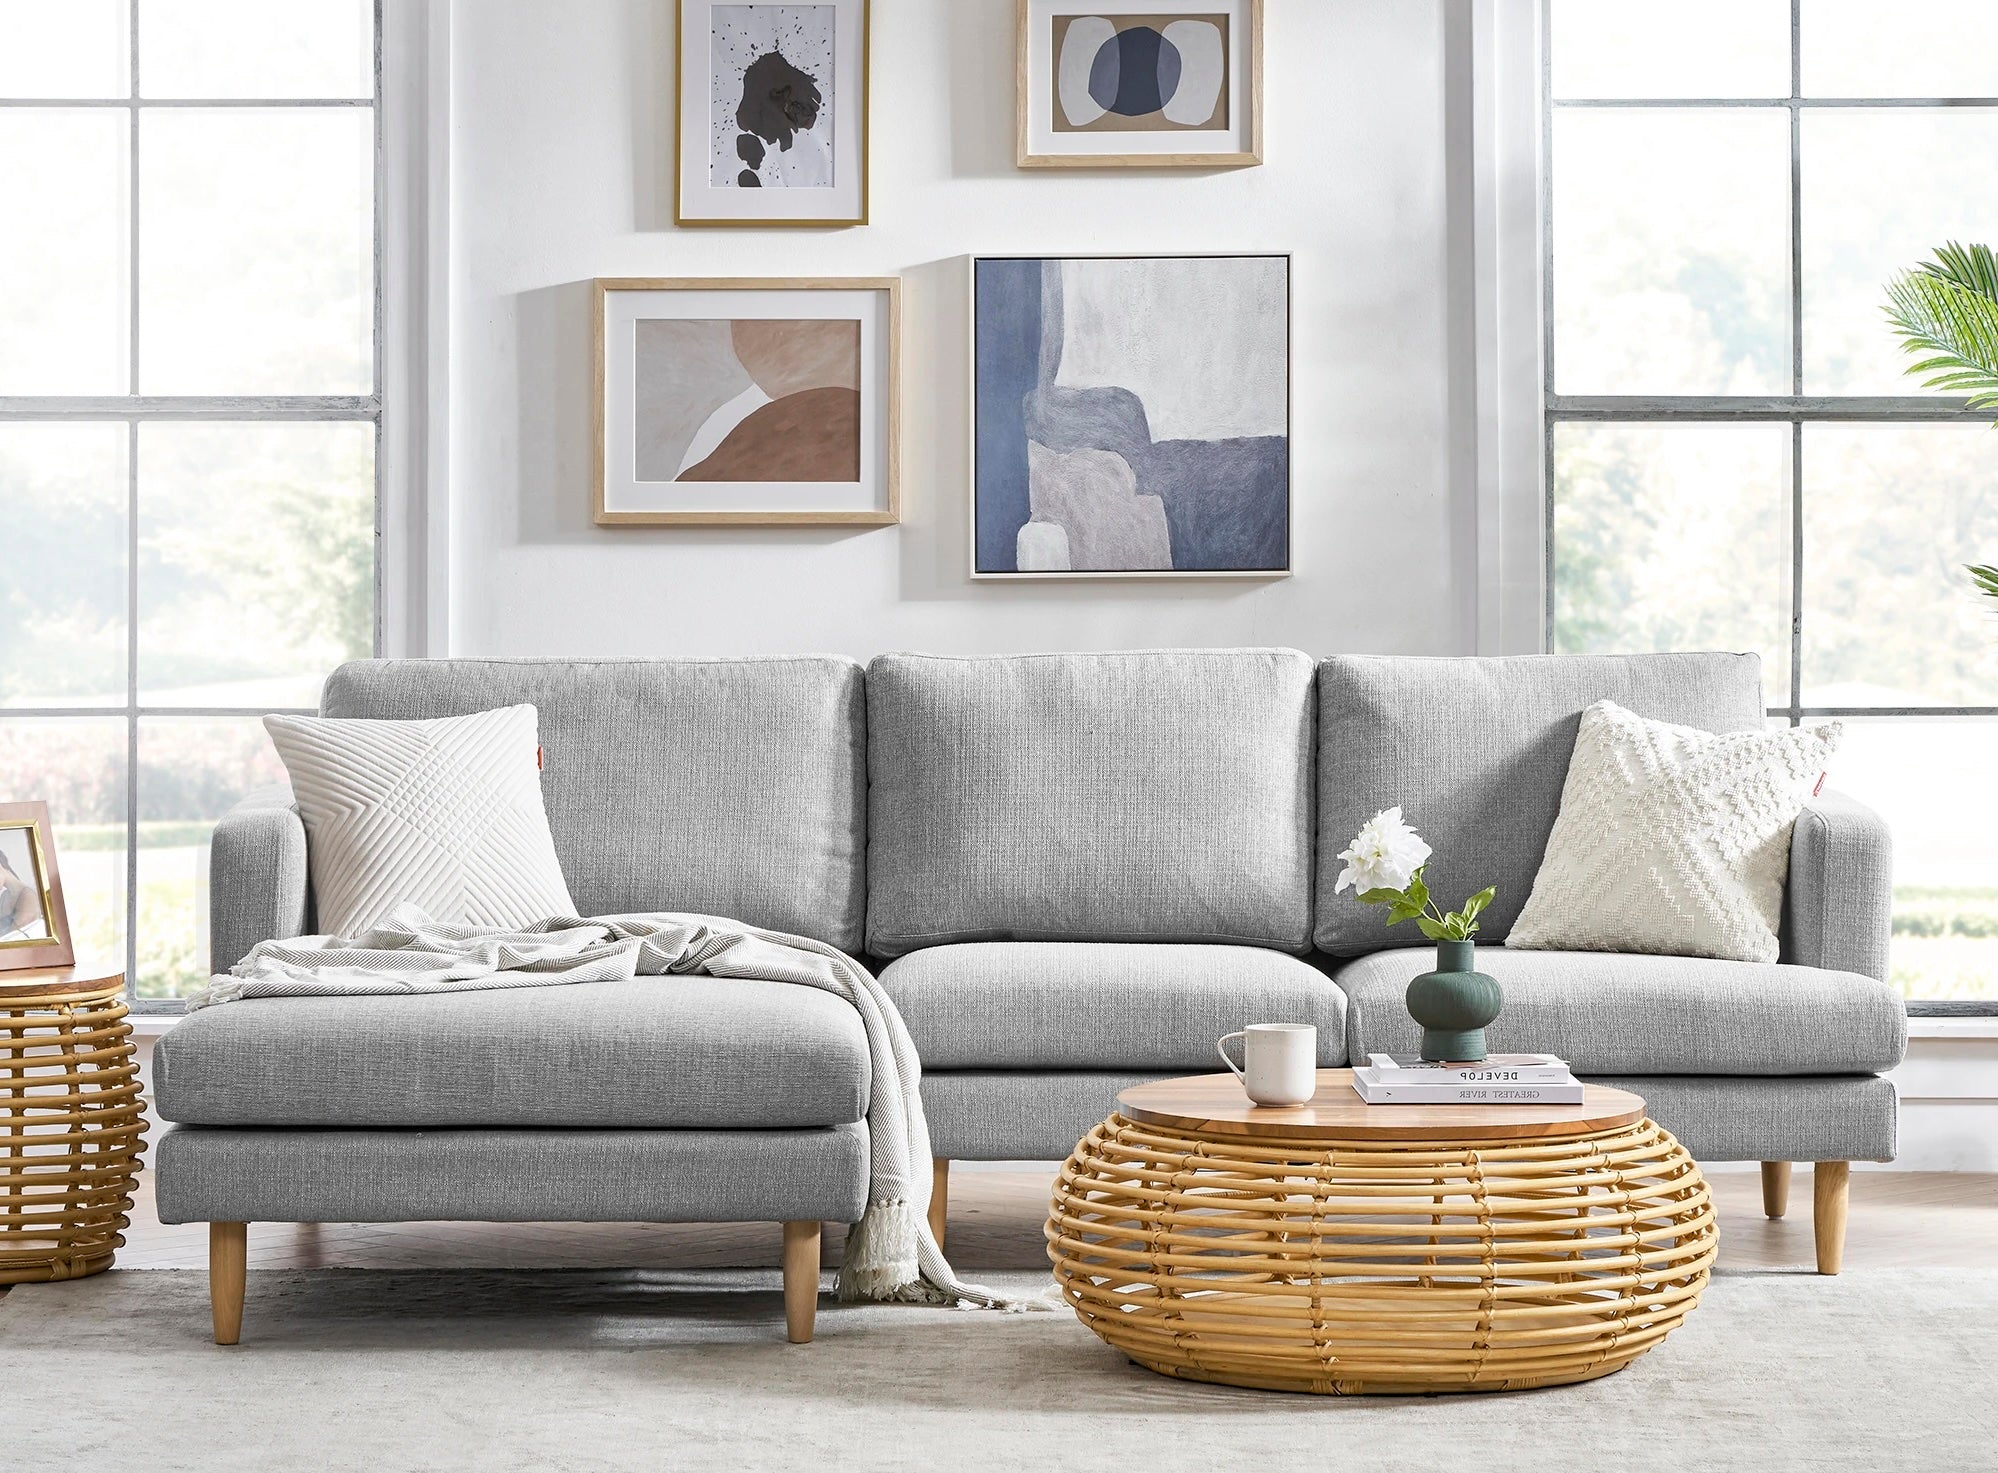 A modern living room with a gray sectional sofa adorned with white pillows and a blanket. In front, there's a round rattan coffee table with a vase of flowers, a candle, and a cup. The walls feature abstract art, and large windows allow ample natural light.